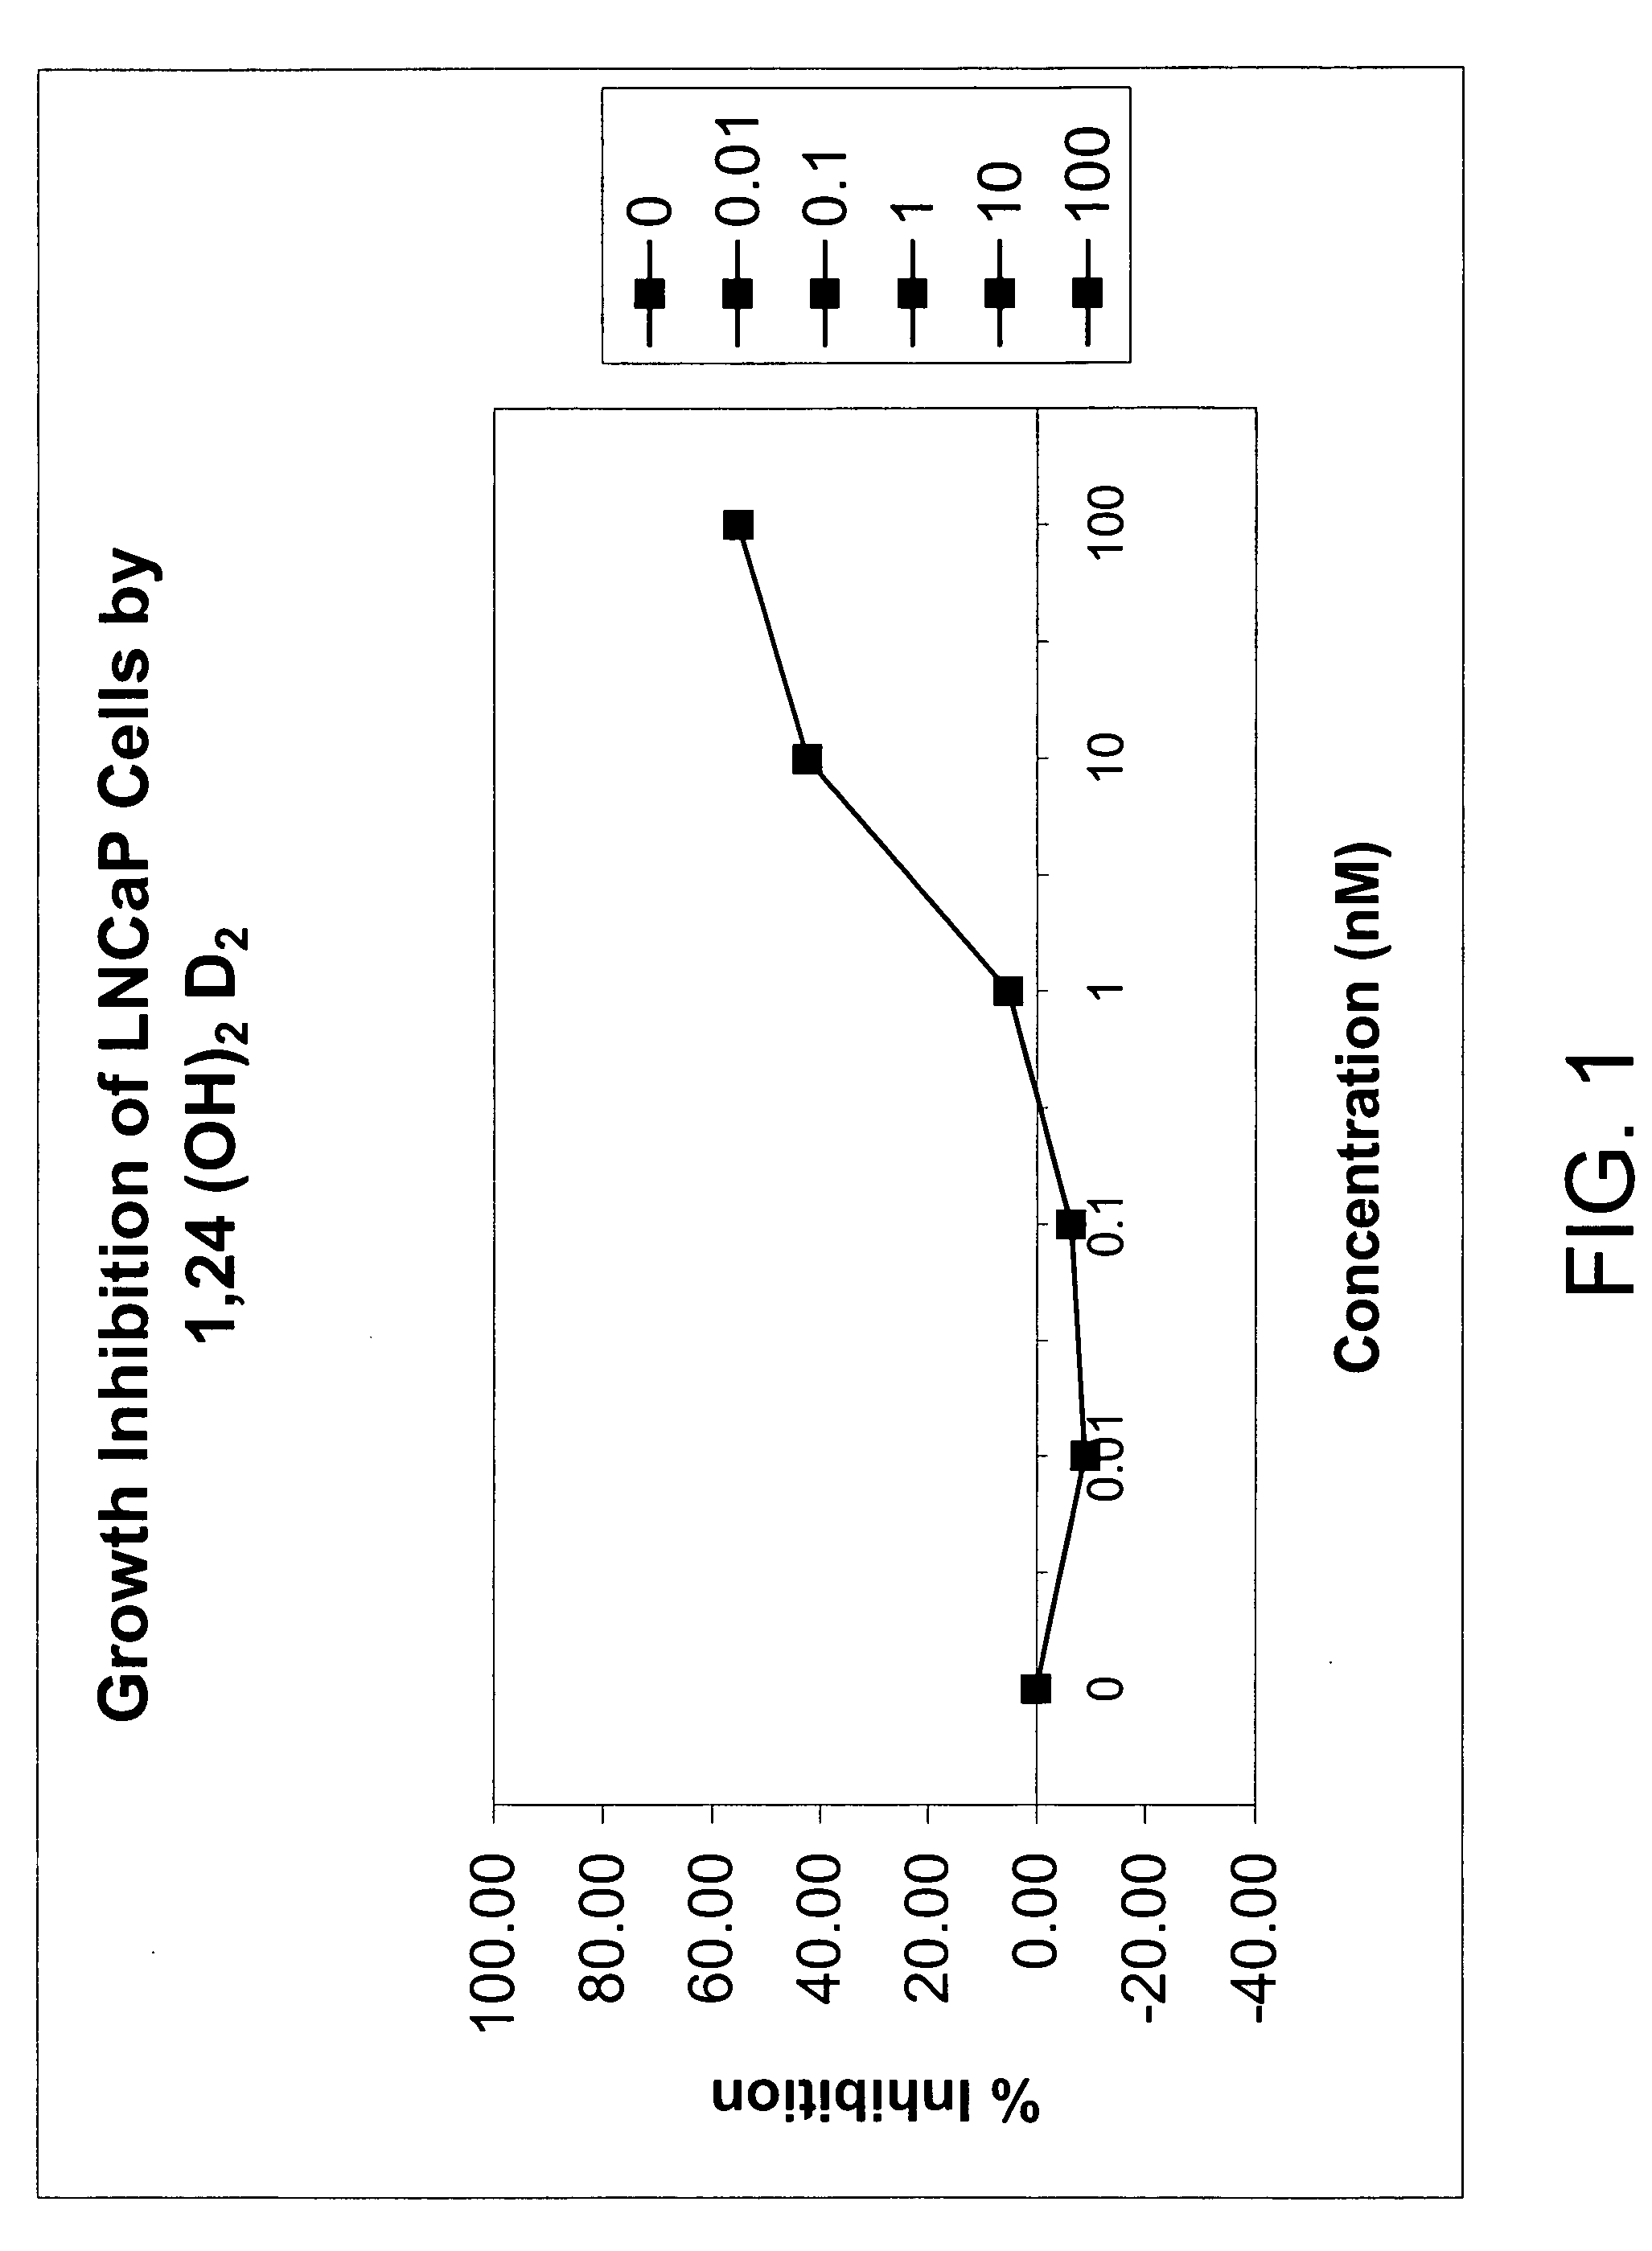 Method of treating prostatic diseases using a combination of vitamin D analogues and other agents